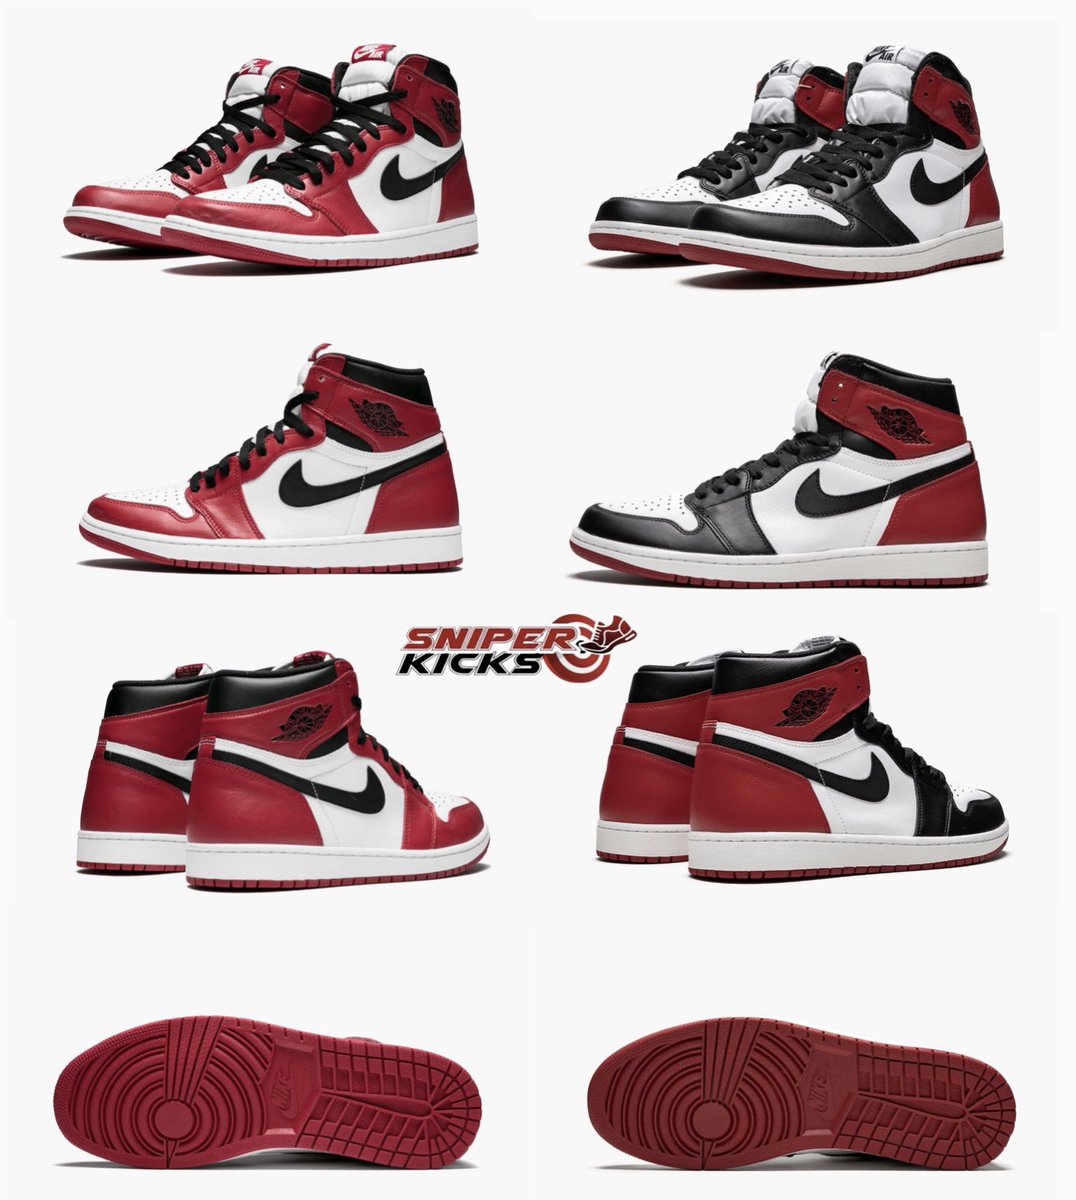 CHOOSE ONE‼️ IN 2022, WE GOT A REIMAGINED IN THE AIR JORDAN 1 CHICAGO (LOST & FOUND)! IN 2024, WE ARE GETTING A REIMAGINED IN THE AIR JORDAN 1 BLACK TOE‼️ COULD IT RIVAL THE AIR JORDAN LOST & FOUND⁉️